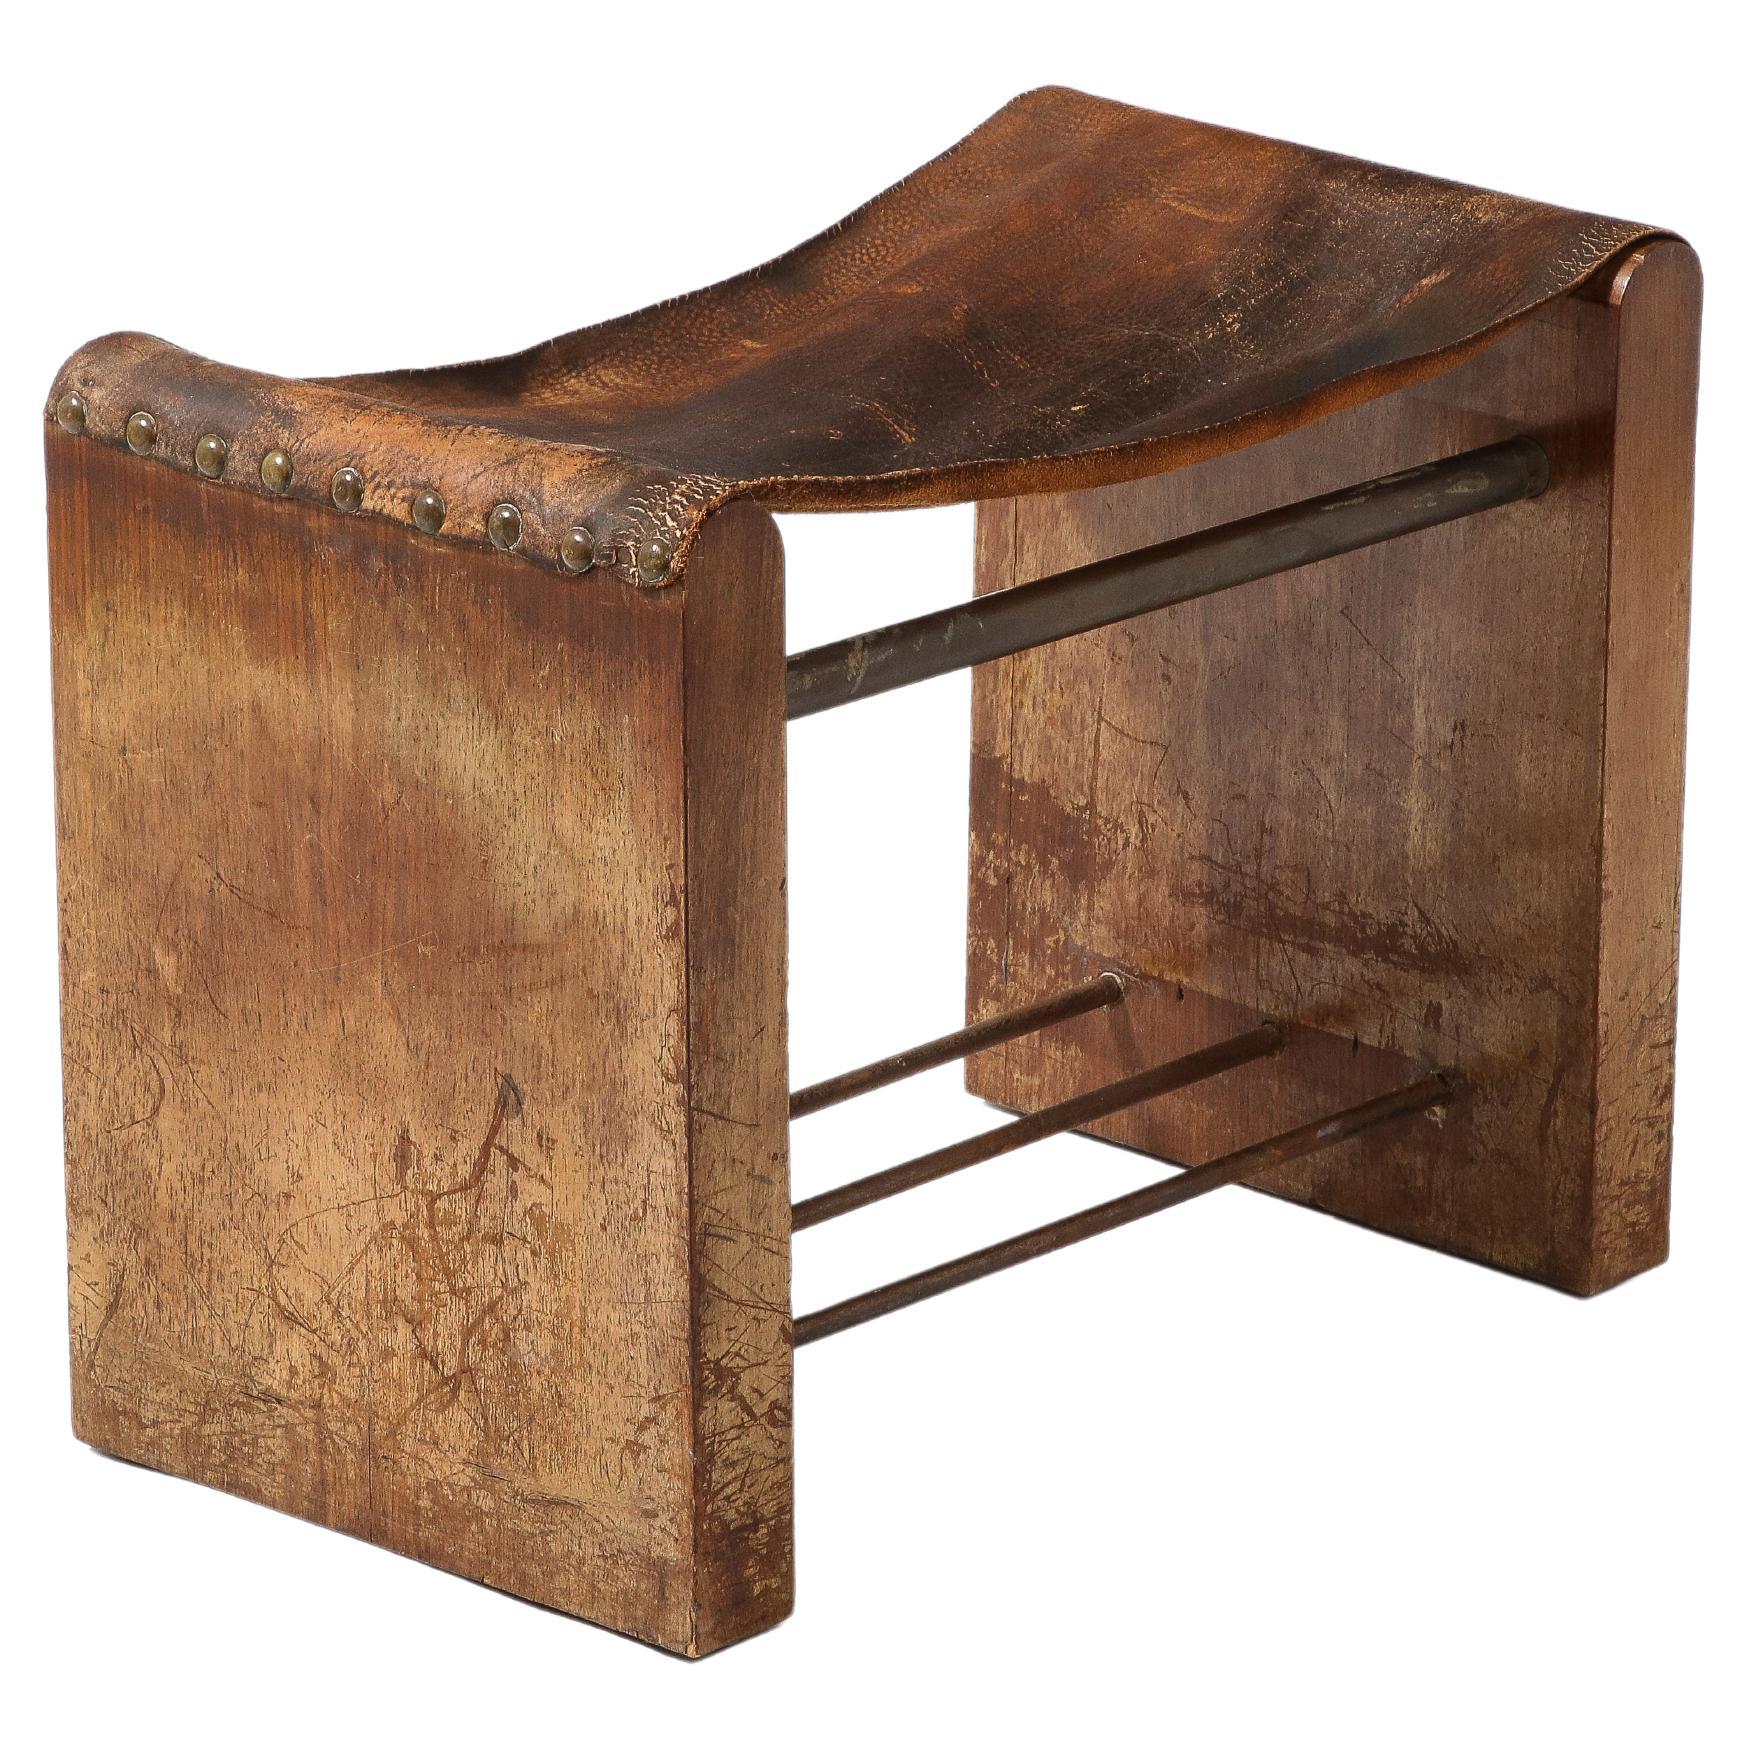 Jacques Adnet Style Small Bench Stool in Oak, Leather & Metal, France 1950's